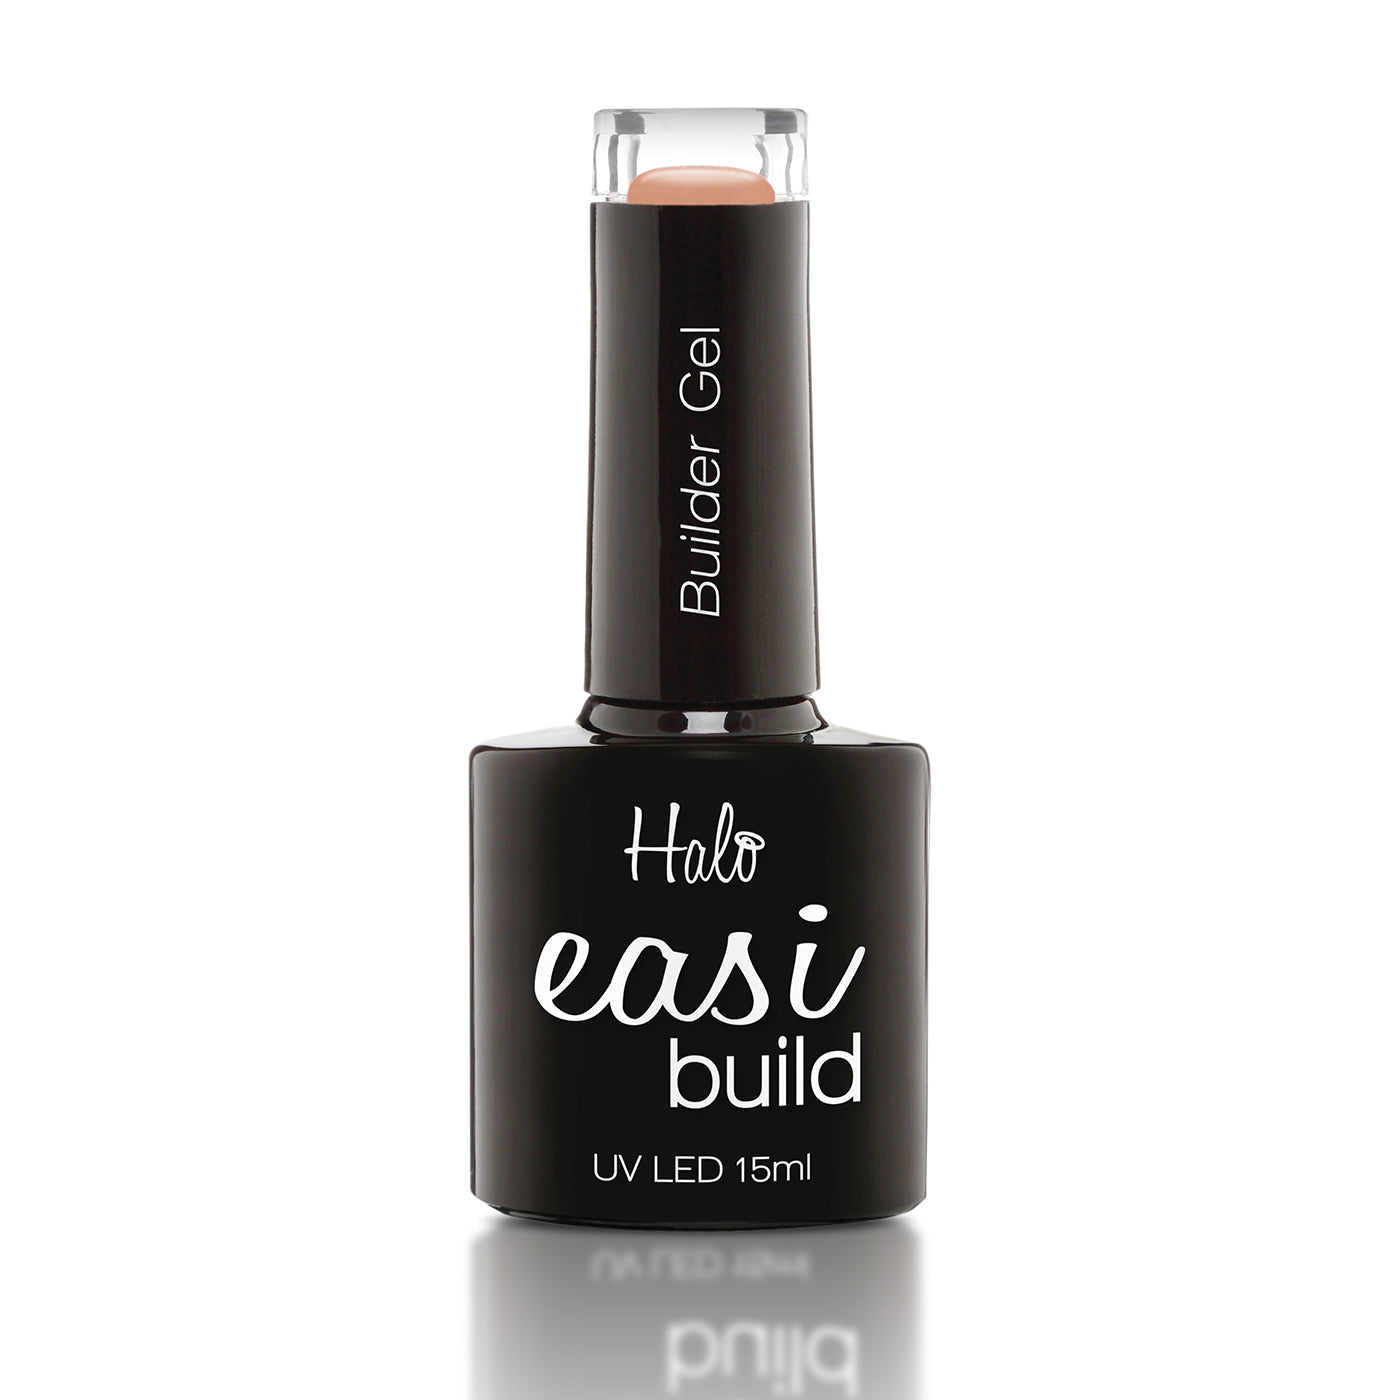 Halo Easi Build Builder Gel - Cover Up Peach (15ml) - Ultimate Hair and Beauty